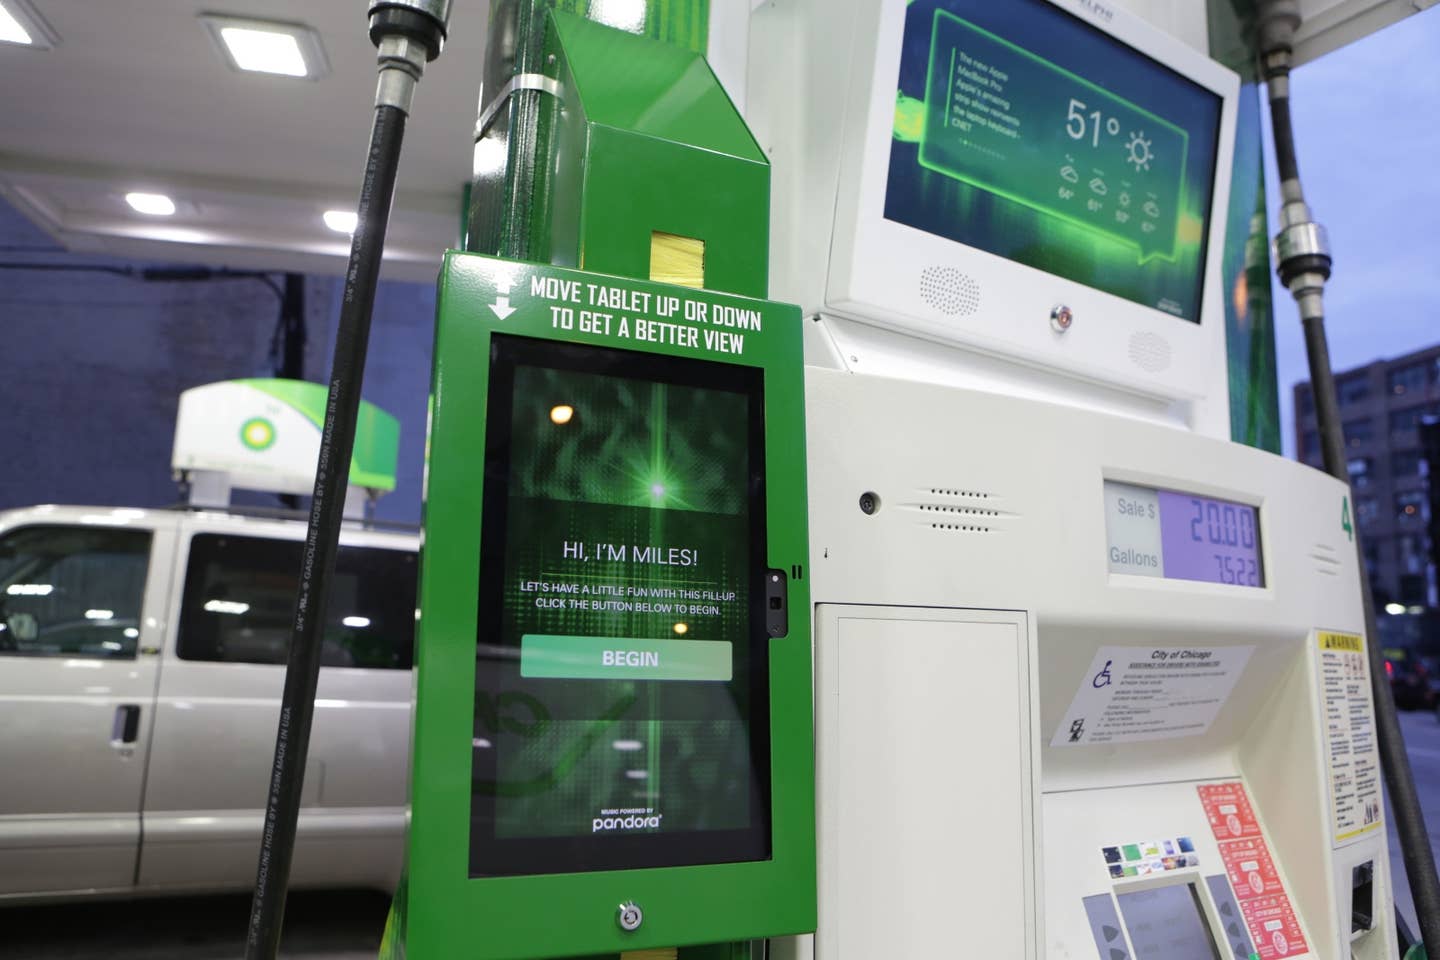 BP Testing Gas Pumps That Sing and Talk to Help Pass Time